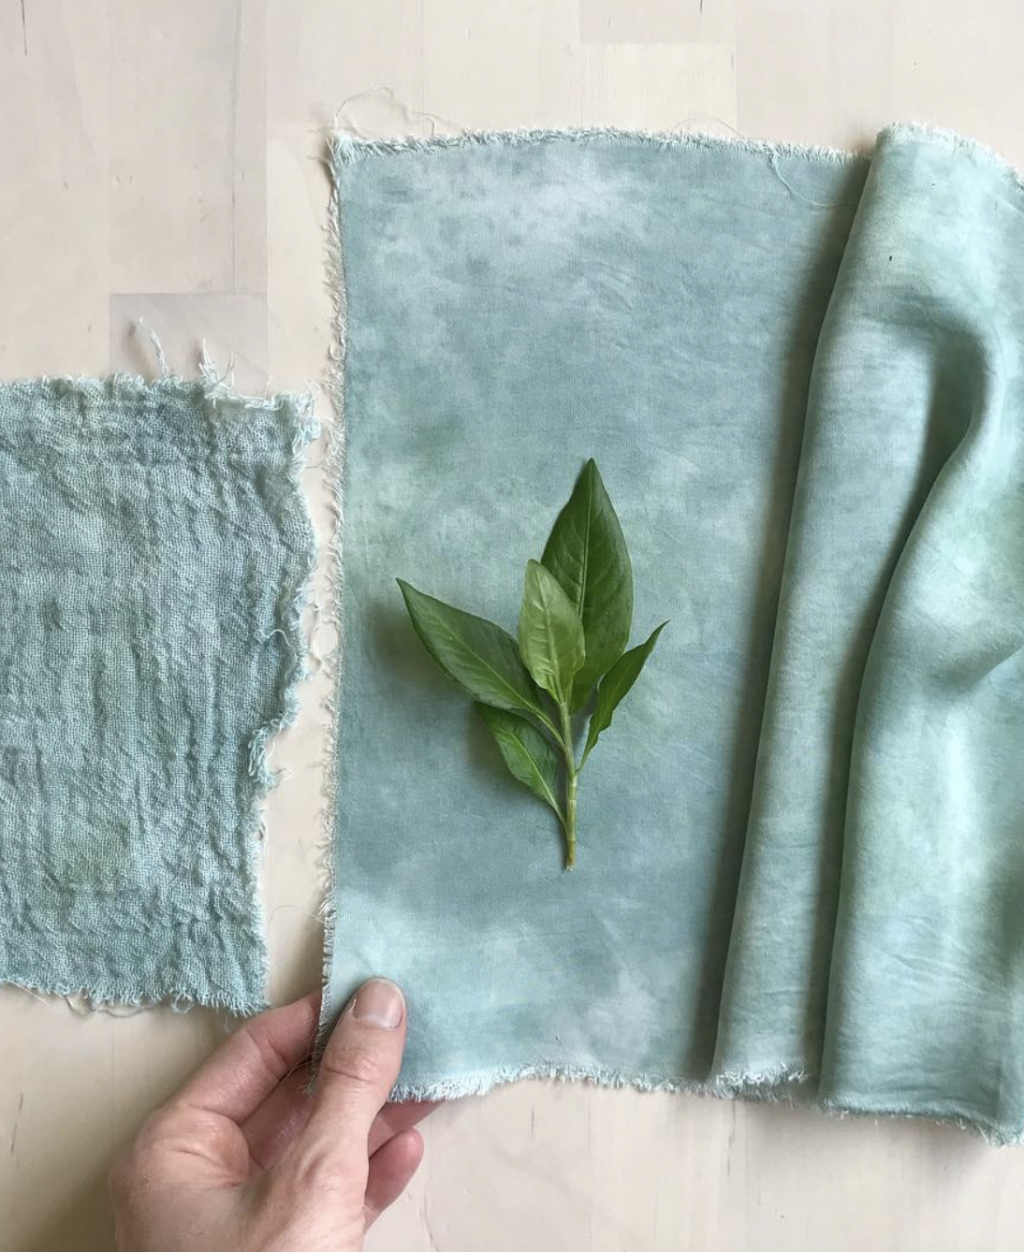 How to Make Natural Dyes for Fabric